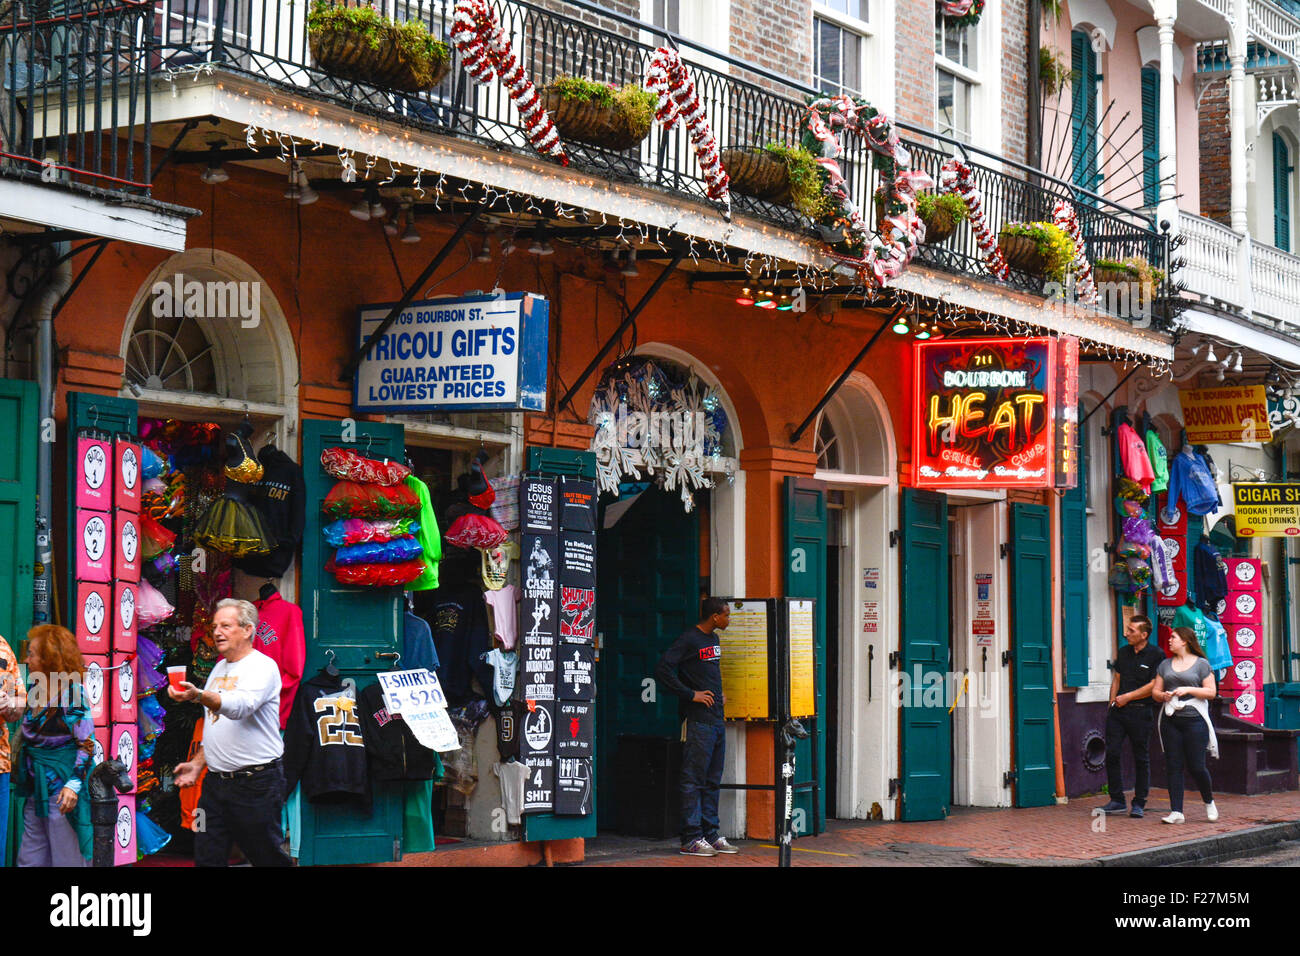 The colorful and well stocked gift, novelty and Souvenir shop; Tricou  Gifts, on Bourbon Street, French Quarter, New Orleans, LA Stock Photo -  Alamy